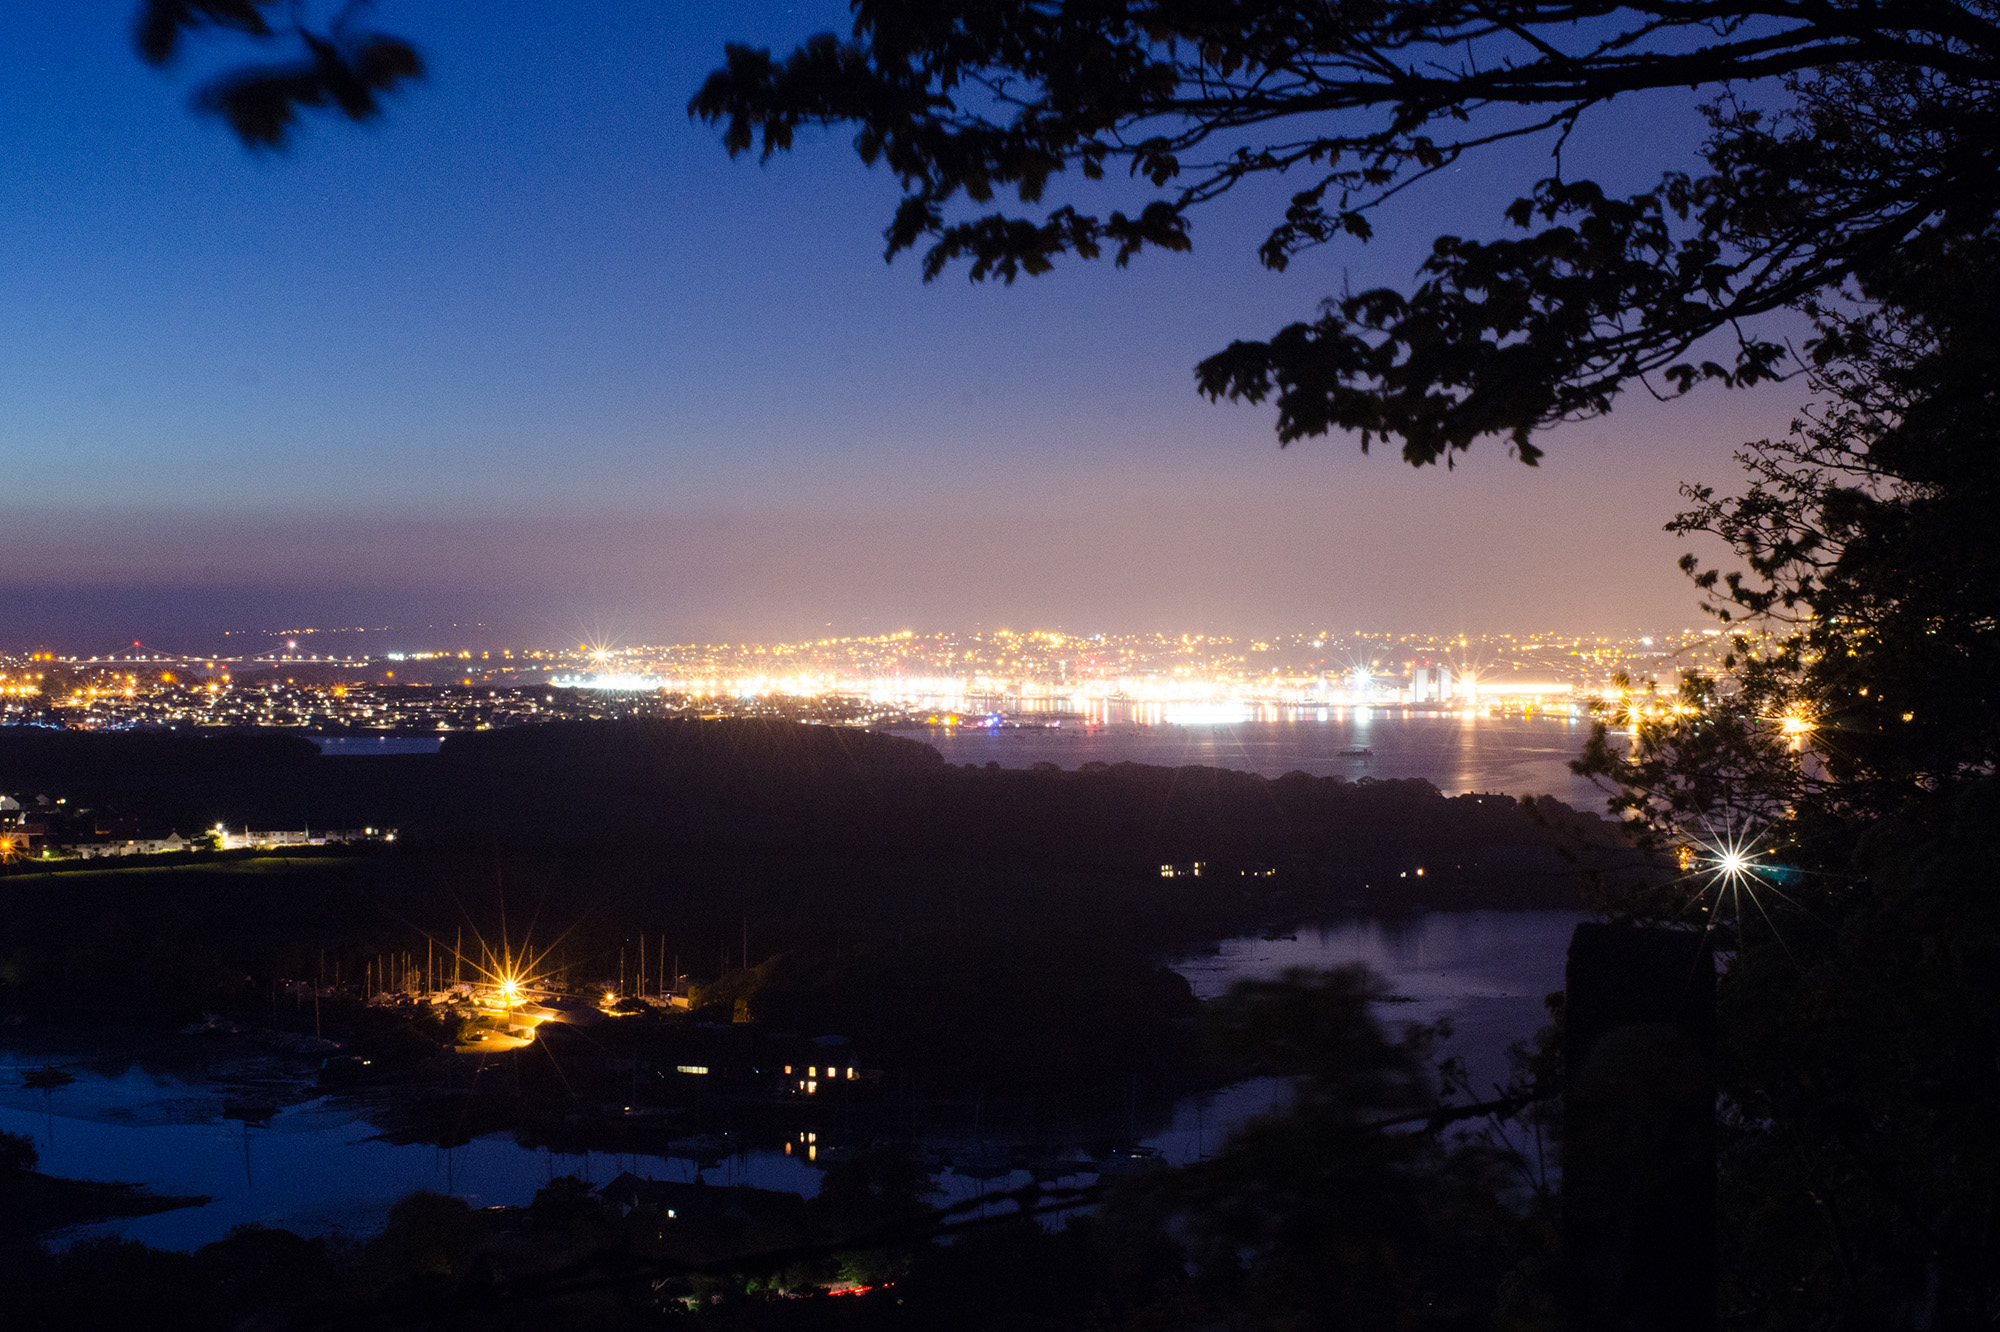 Street lighting creates an artificial glow in the night sky above Plymouth and the surrounding areas (Credit Thomas Davies, University of Plymouth)